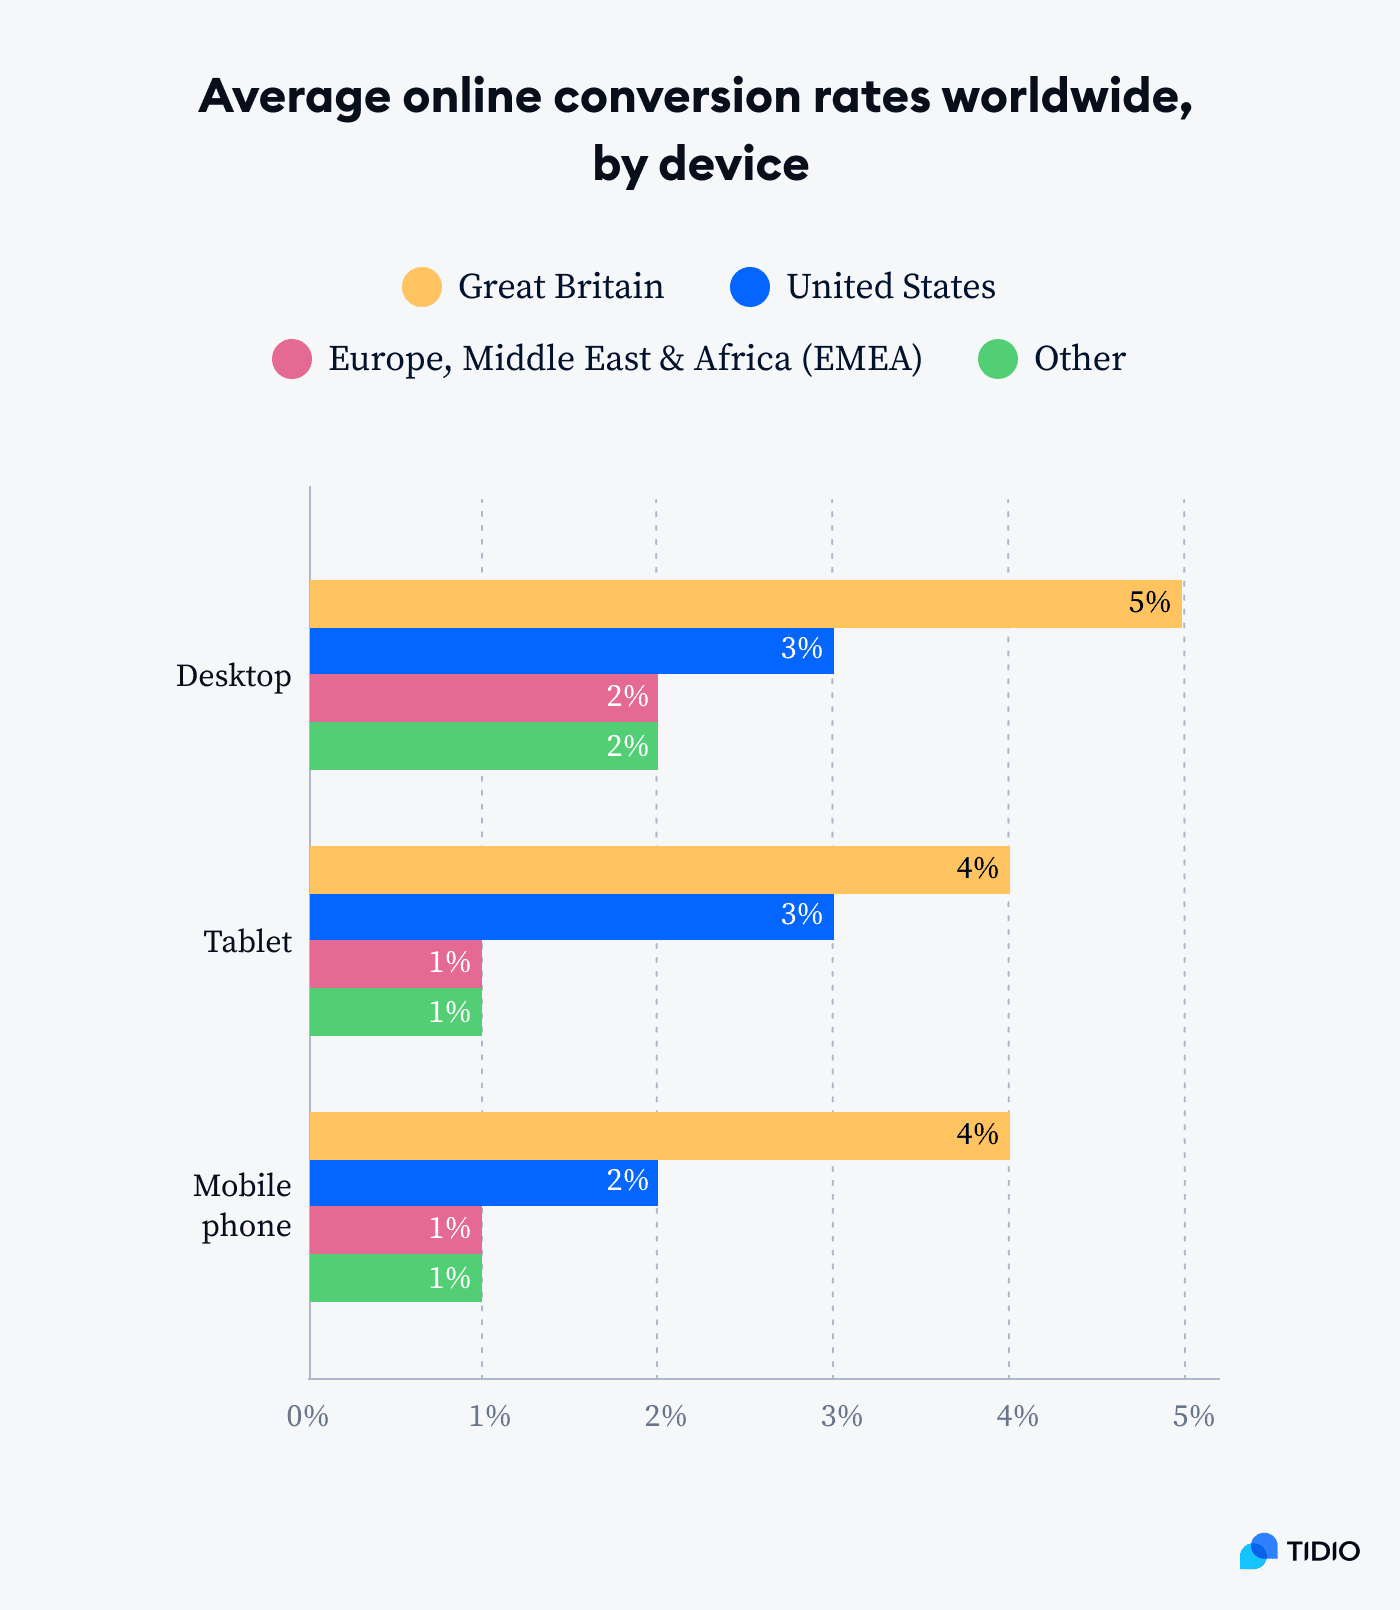 average ecommerce conversion rate wordwide by device on an image